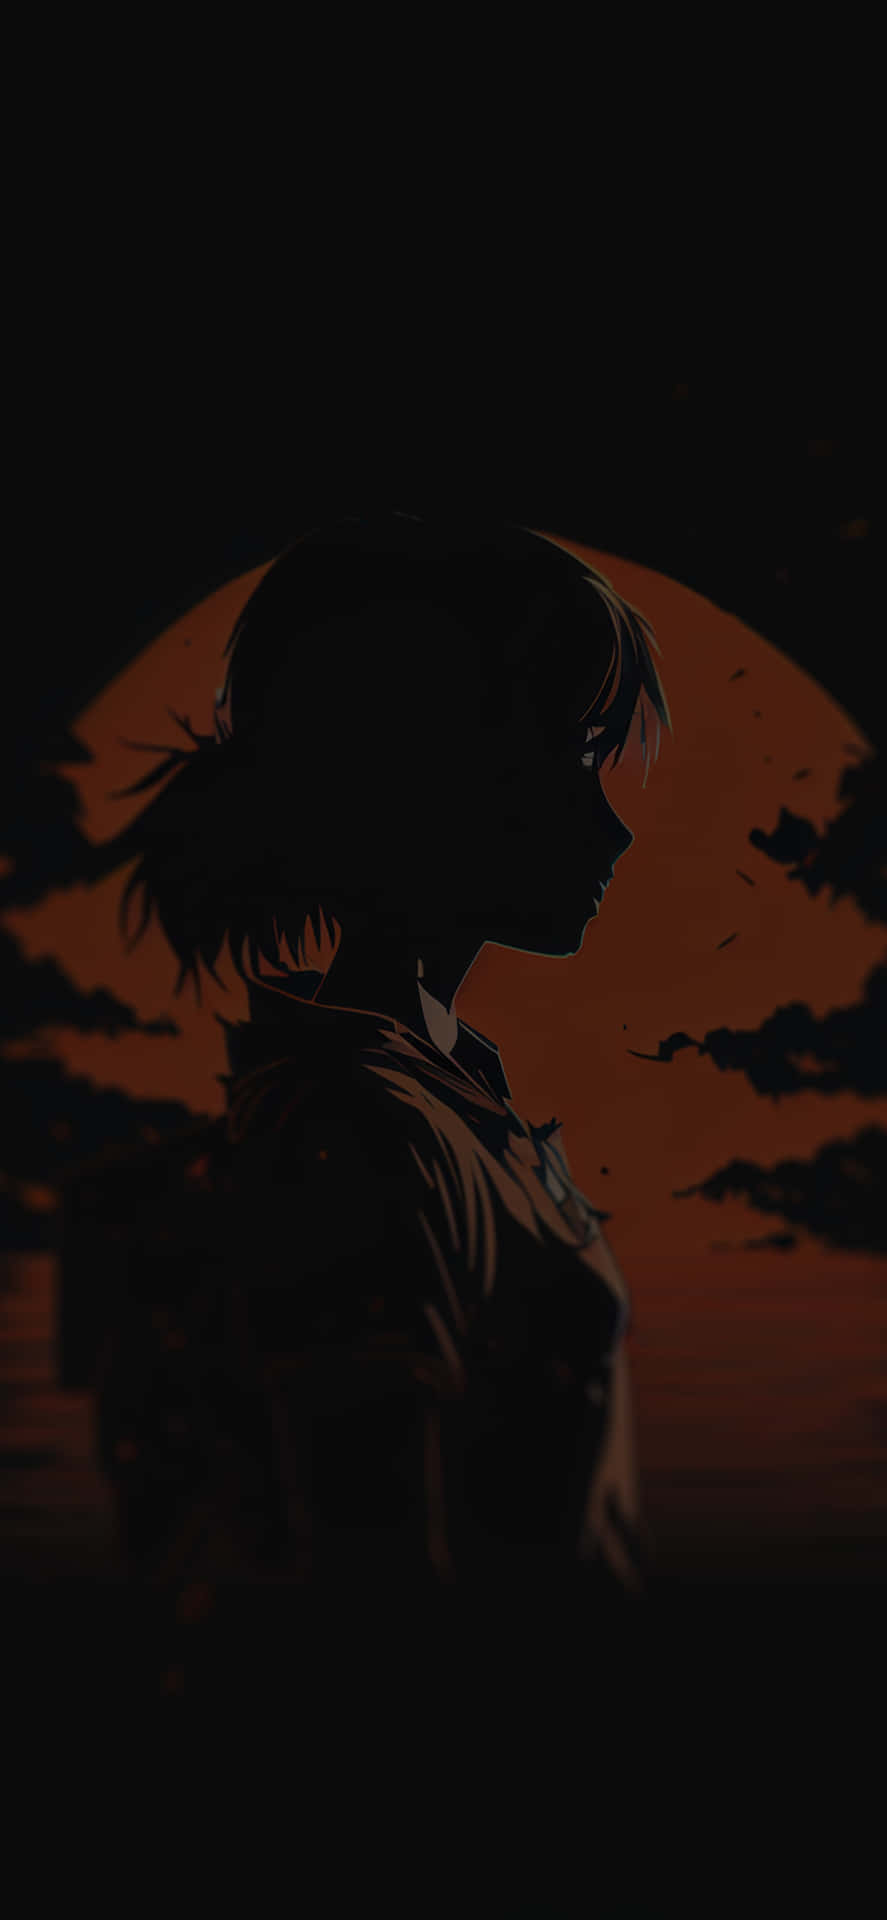 A Silhouette Of A Woman In Front Of A Sunset